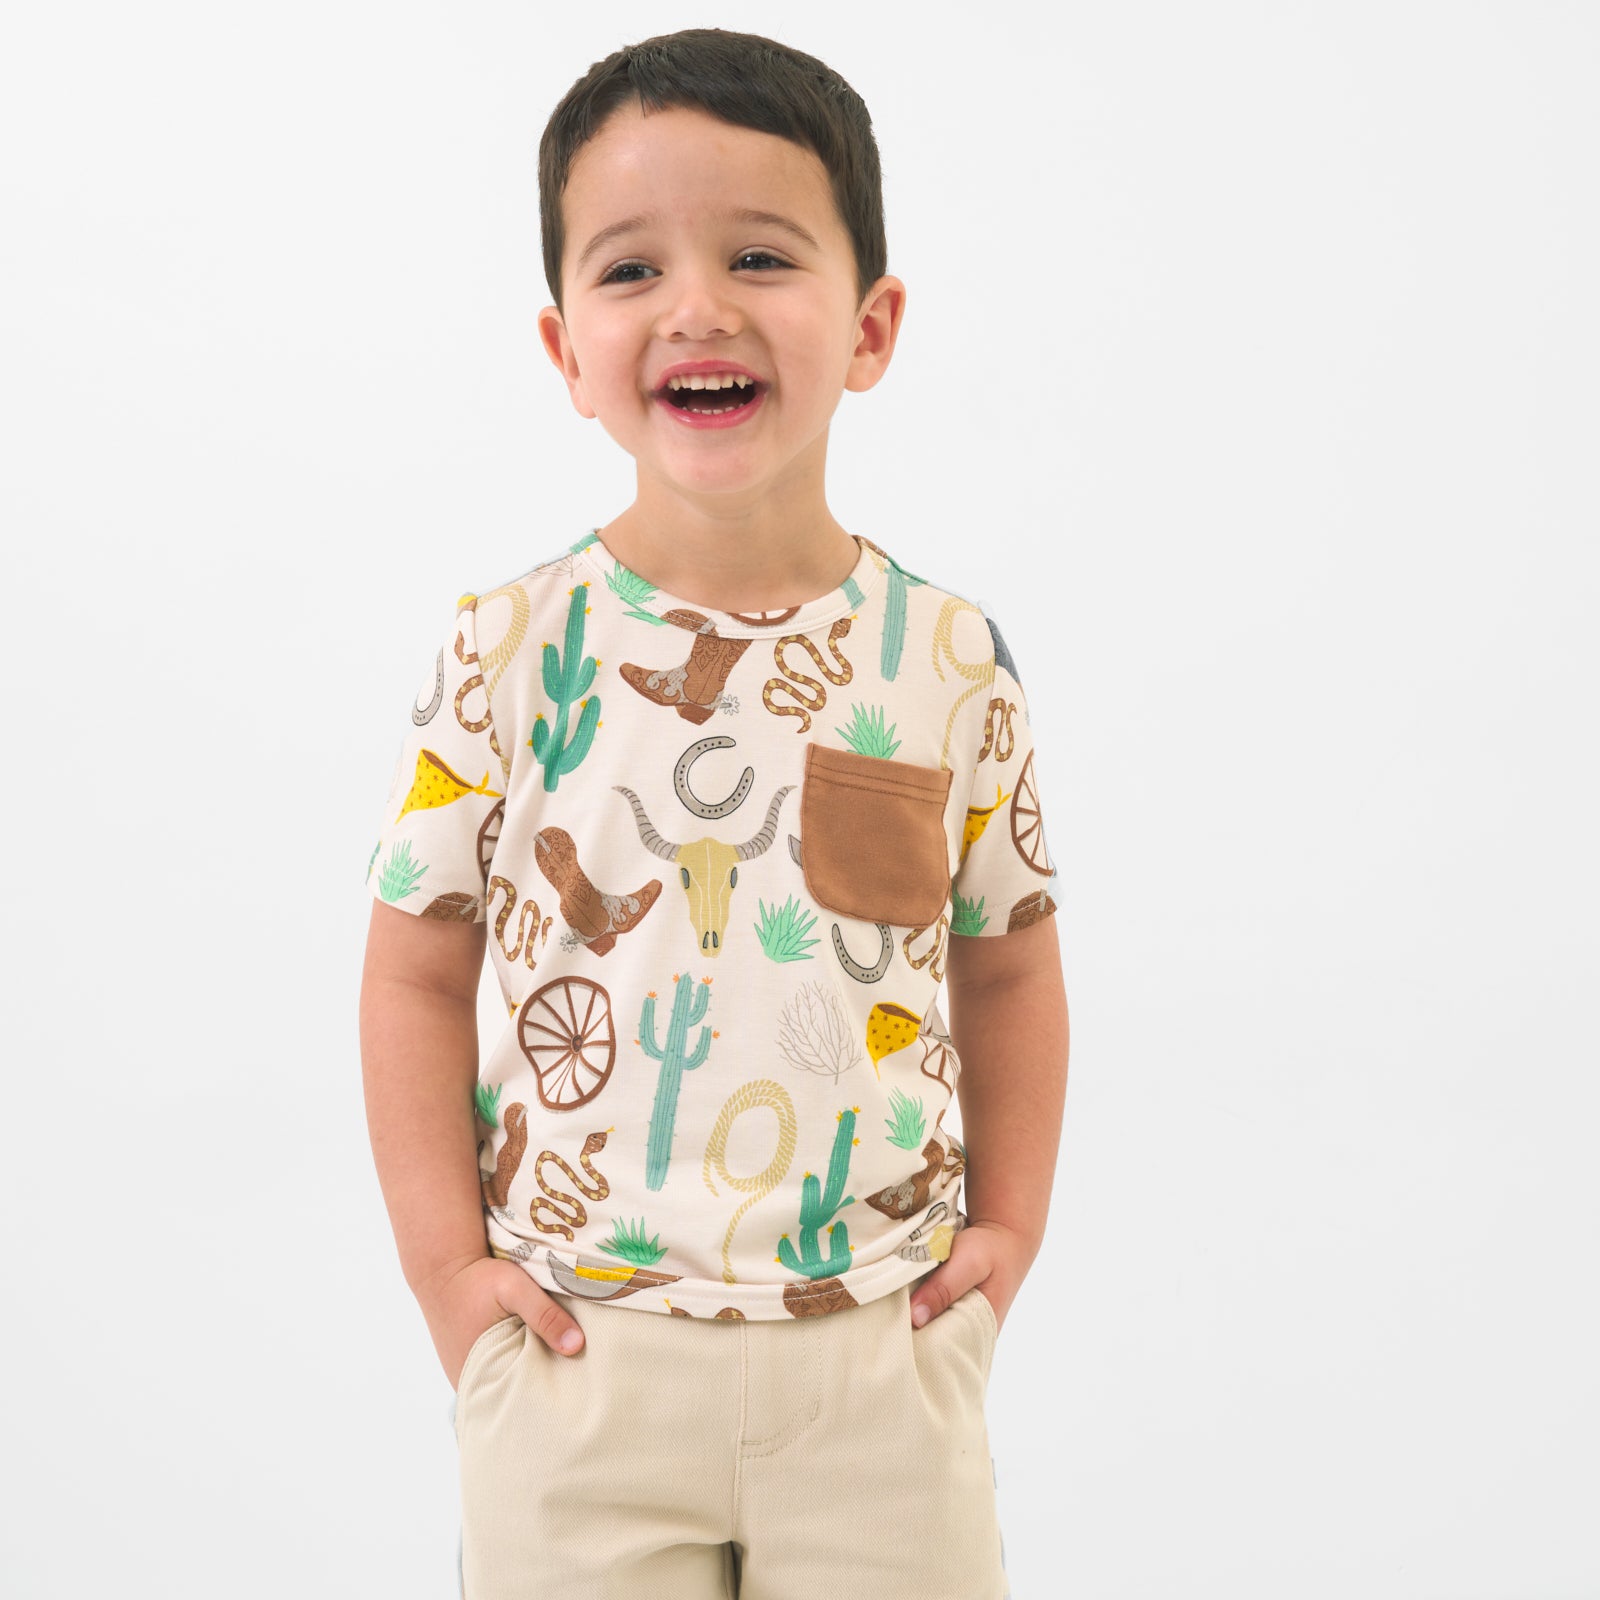 Child wearing a Caramel Ready to Rodeo pocket tee paired with light khaki chino shorts